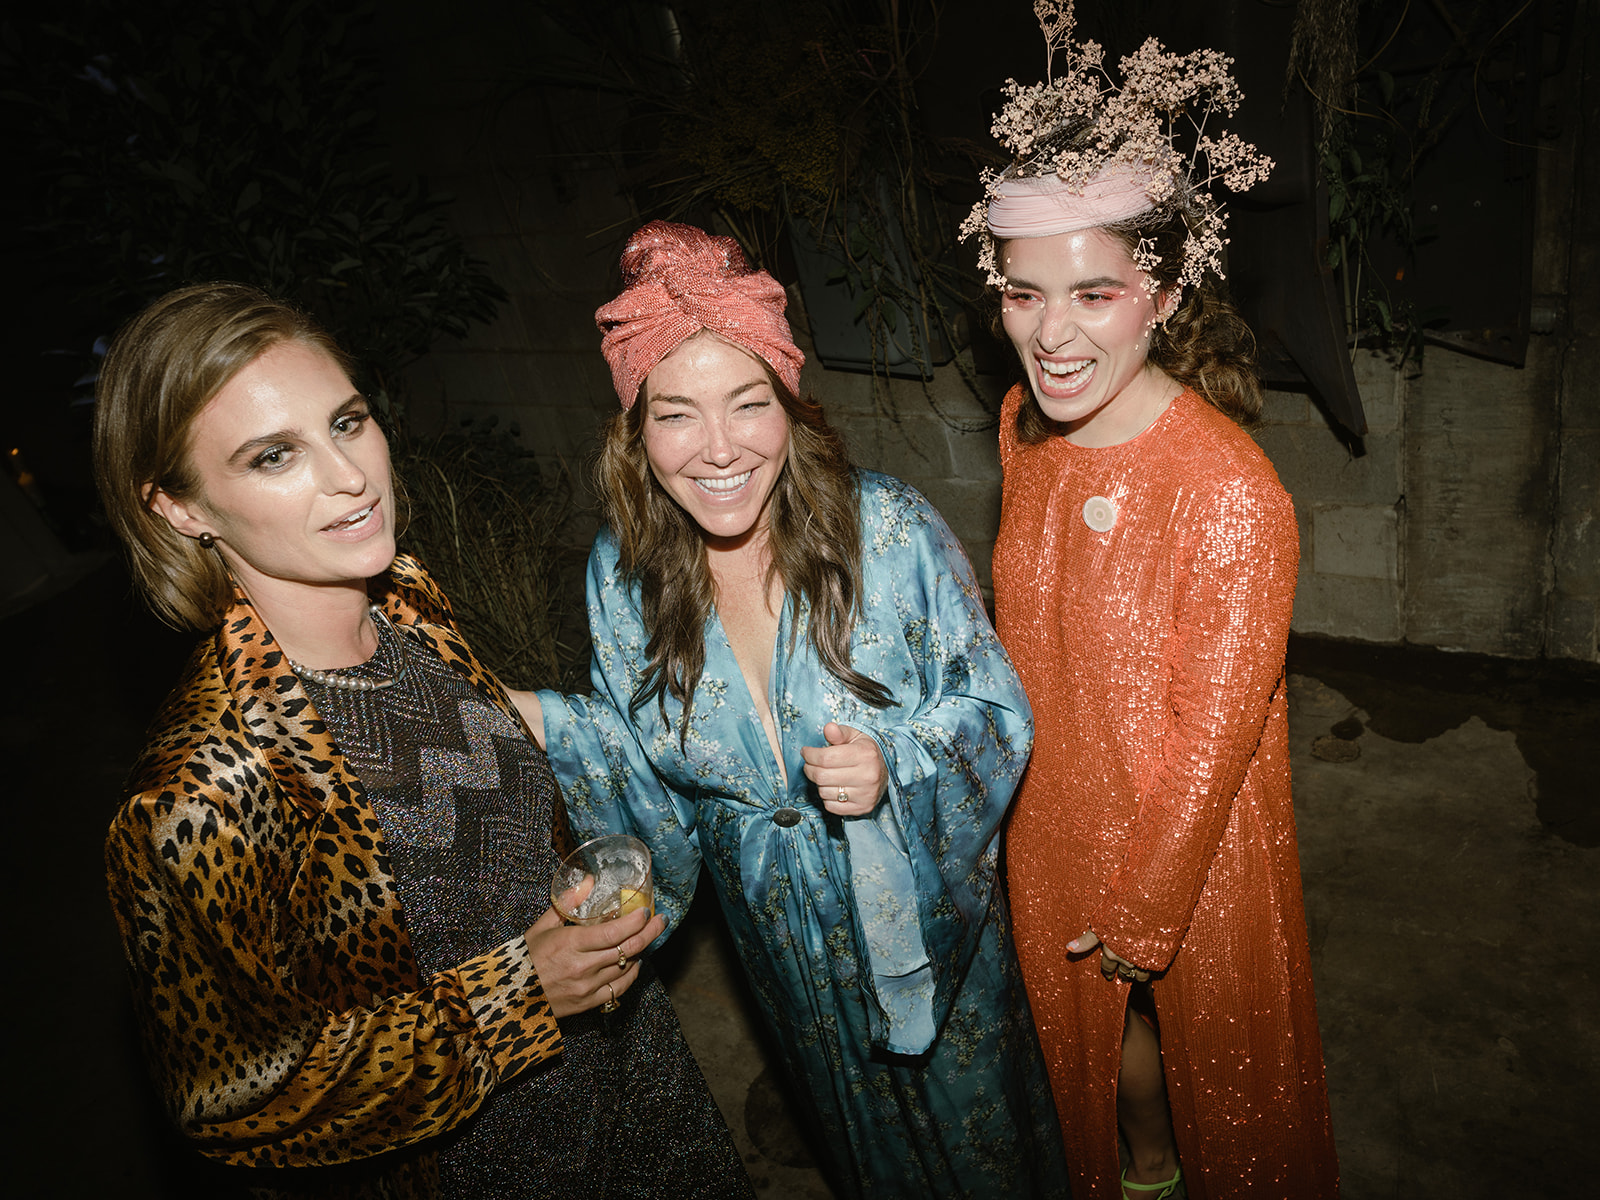 Guests were encouraged to dress on theme as surreal secret garden